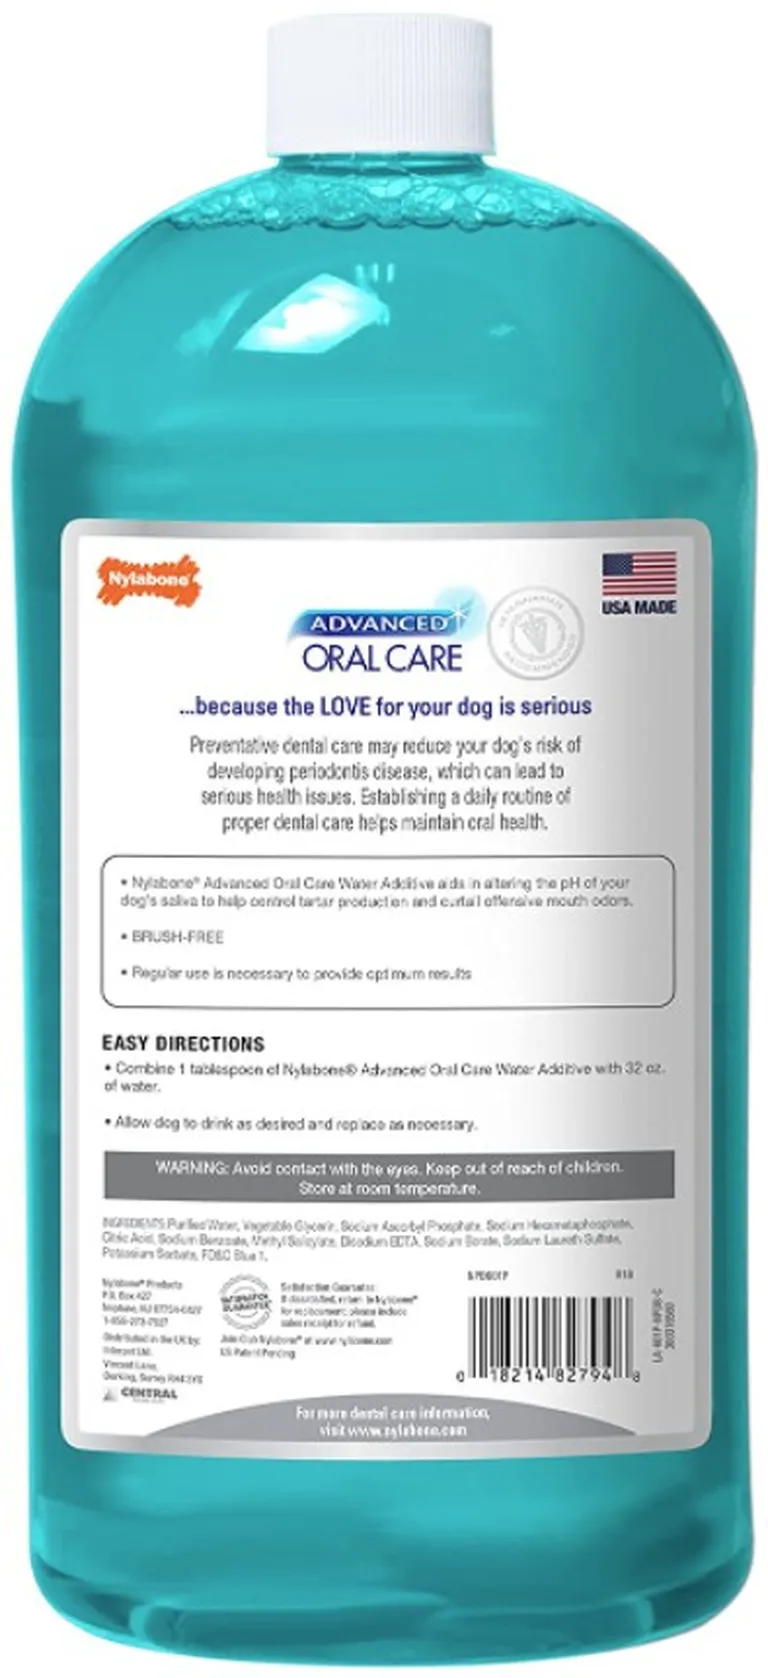 Nylabone Advanced Oral Care Water Additive Ultra Clean Tartar Control for Dogs Photo 2